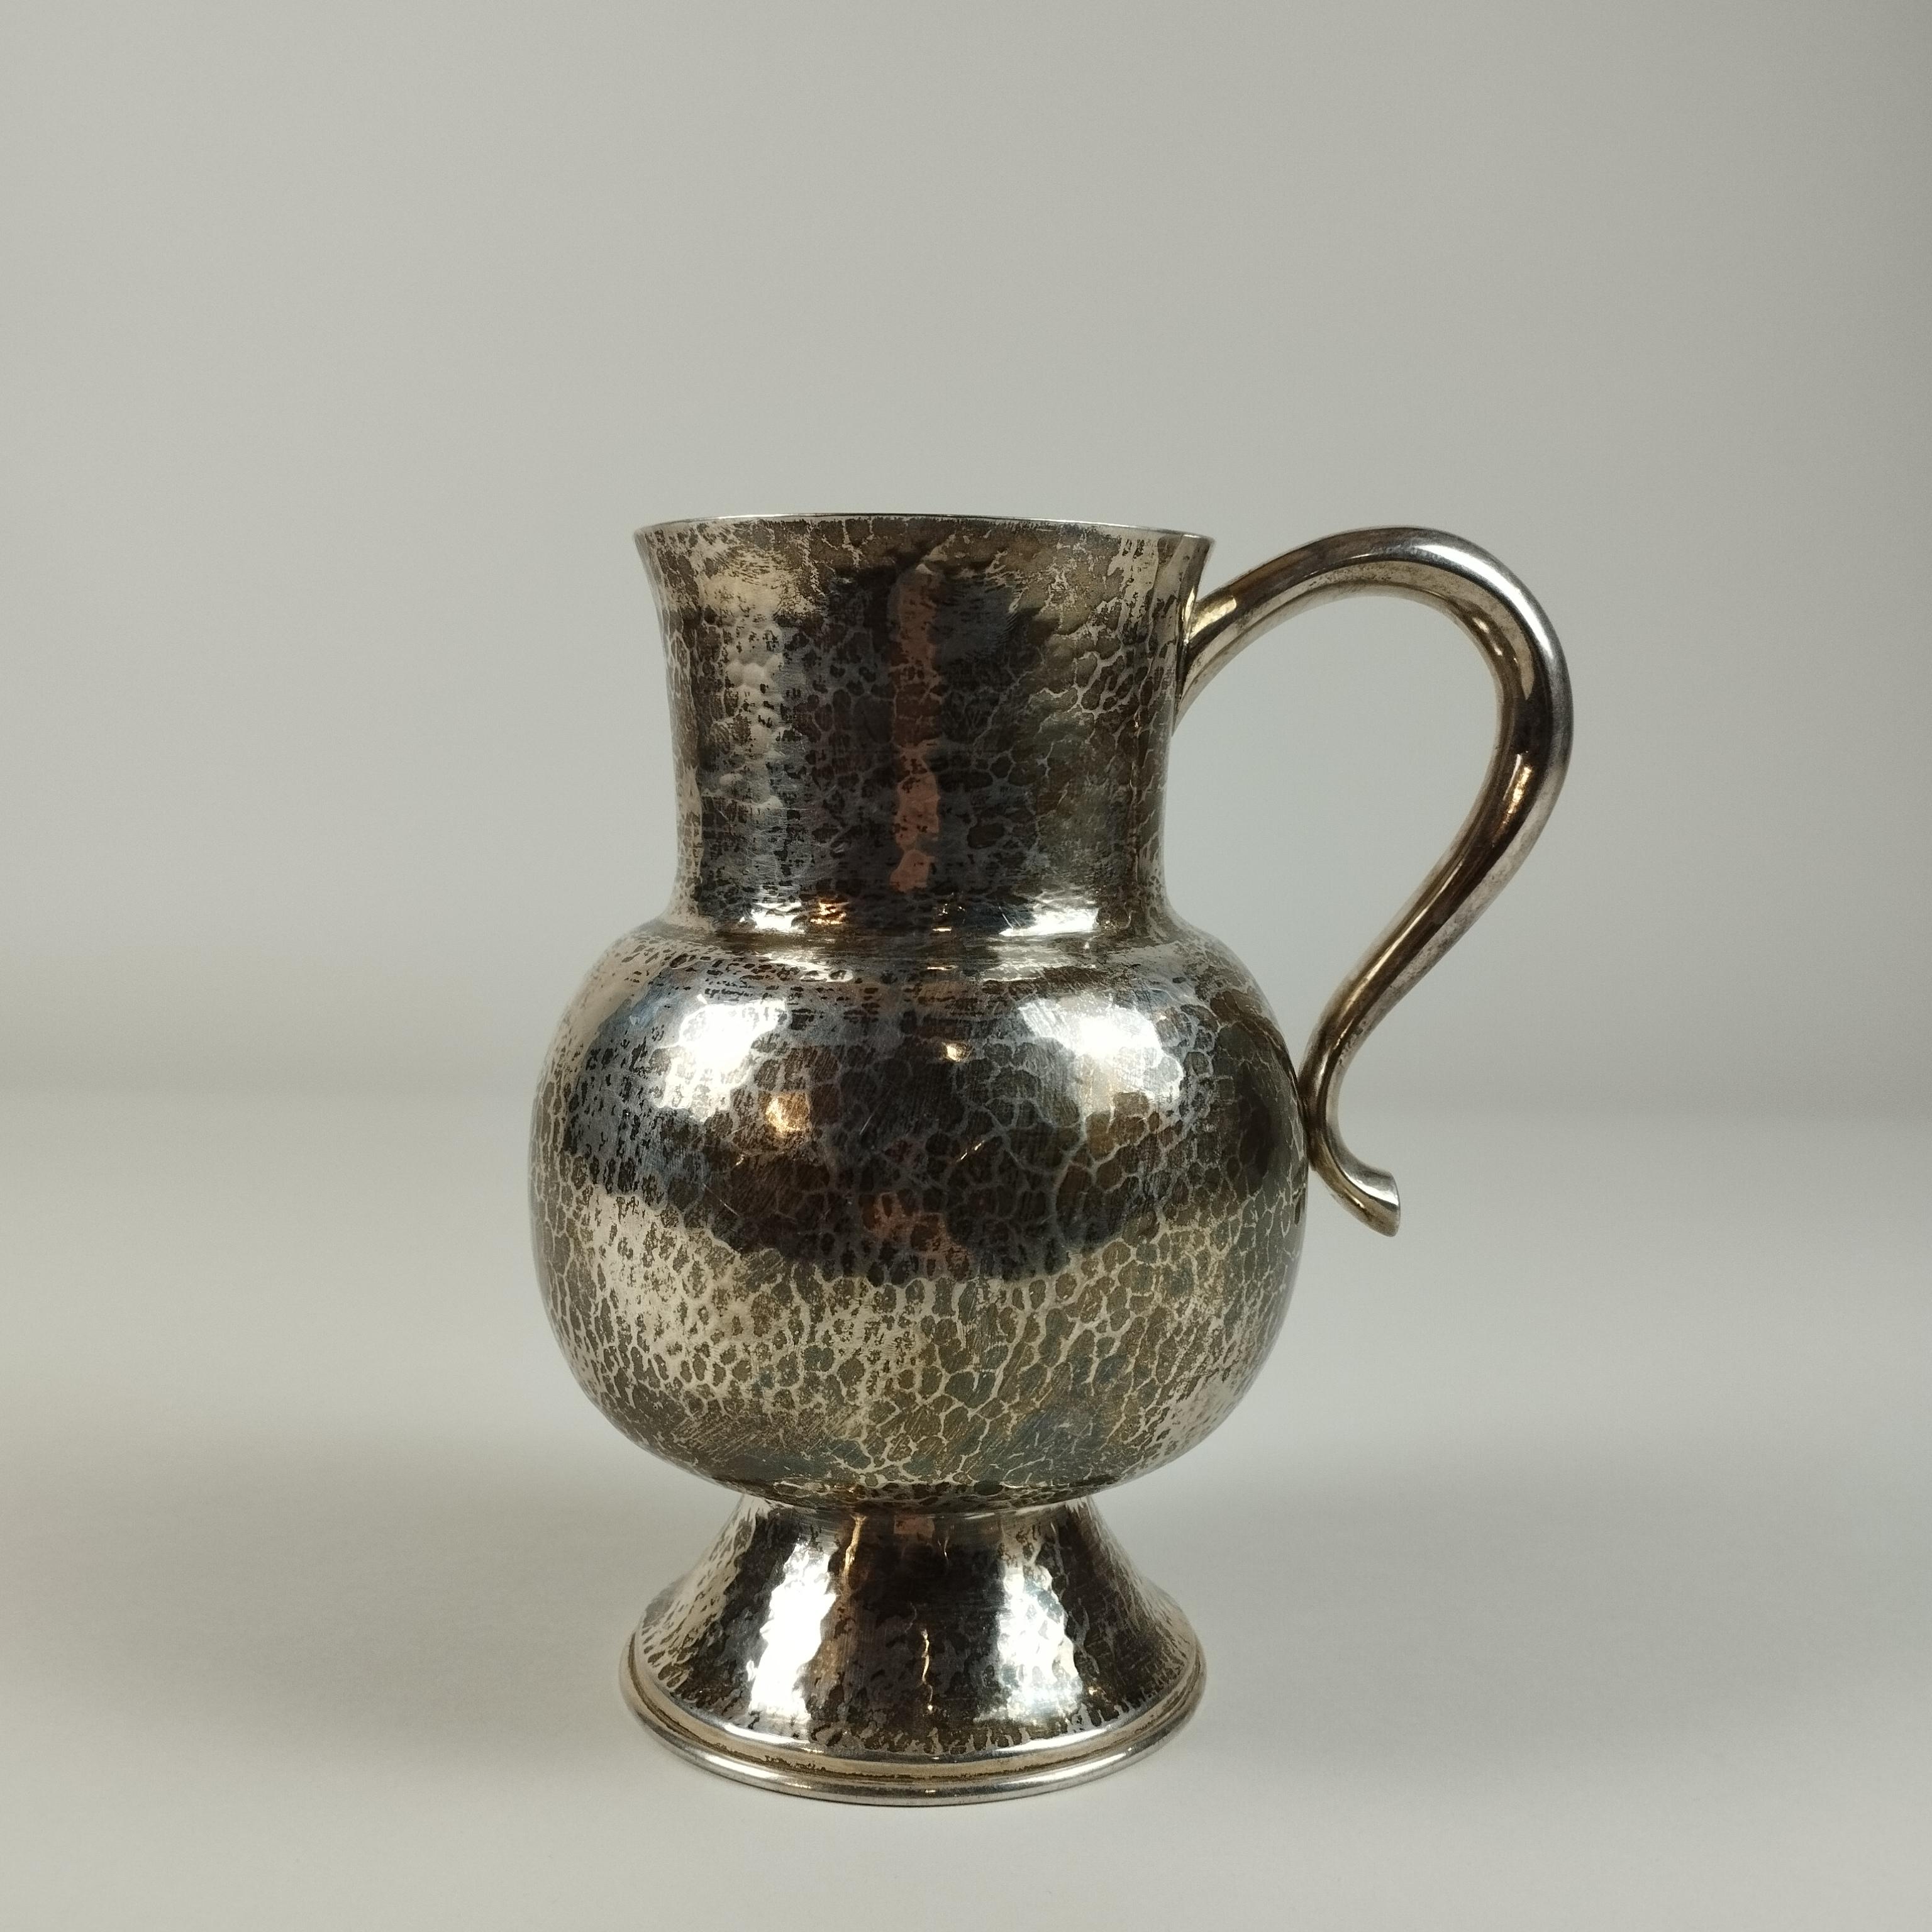 A Mexican mid-century modern Sterling silver pitcher by Tane Orfebres. The pitcher's body is hammered.

The pitcher's weight is 1039 grams. (33.4046 Troy ounces).

Tane Orfebres was founded in 1942 in Mexico City by Sergio and Natalia Leites, a